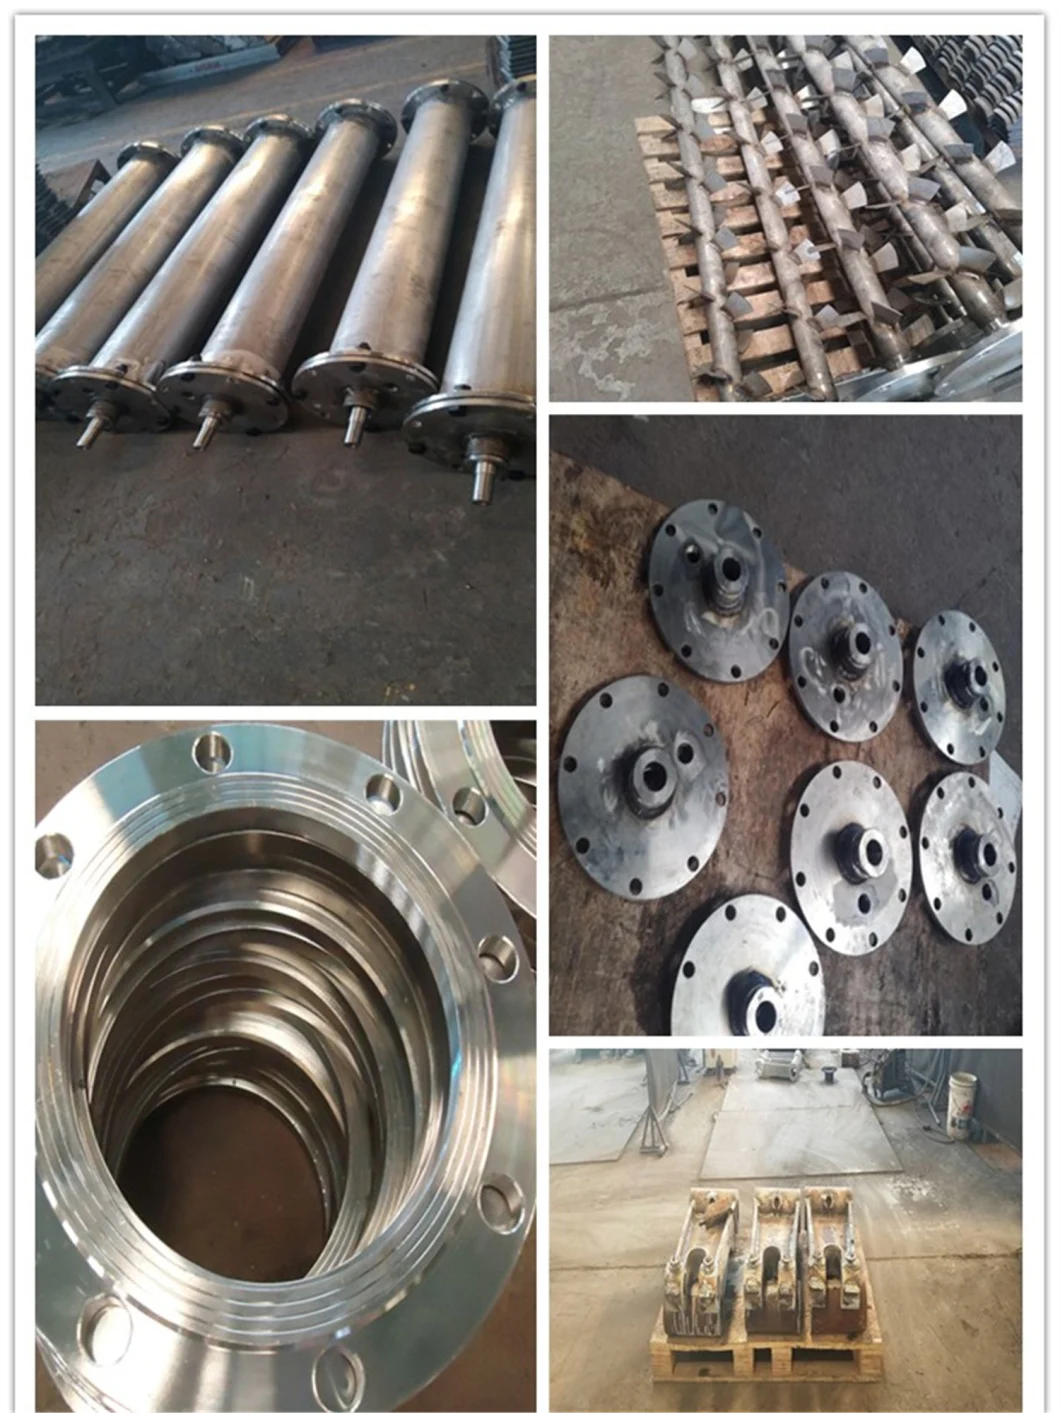 High Quality Spare Part/Machining/Machined/Machinery Parts/Machining Part/Machinery Parts